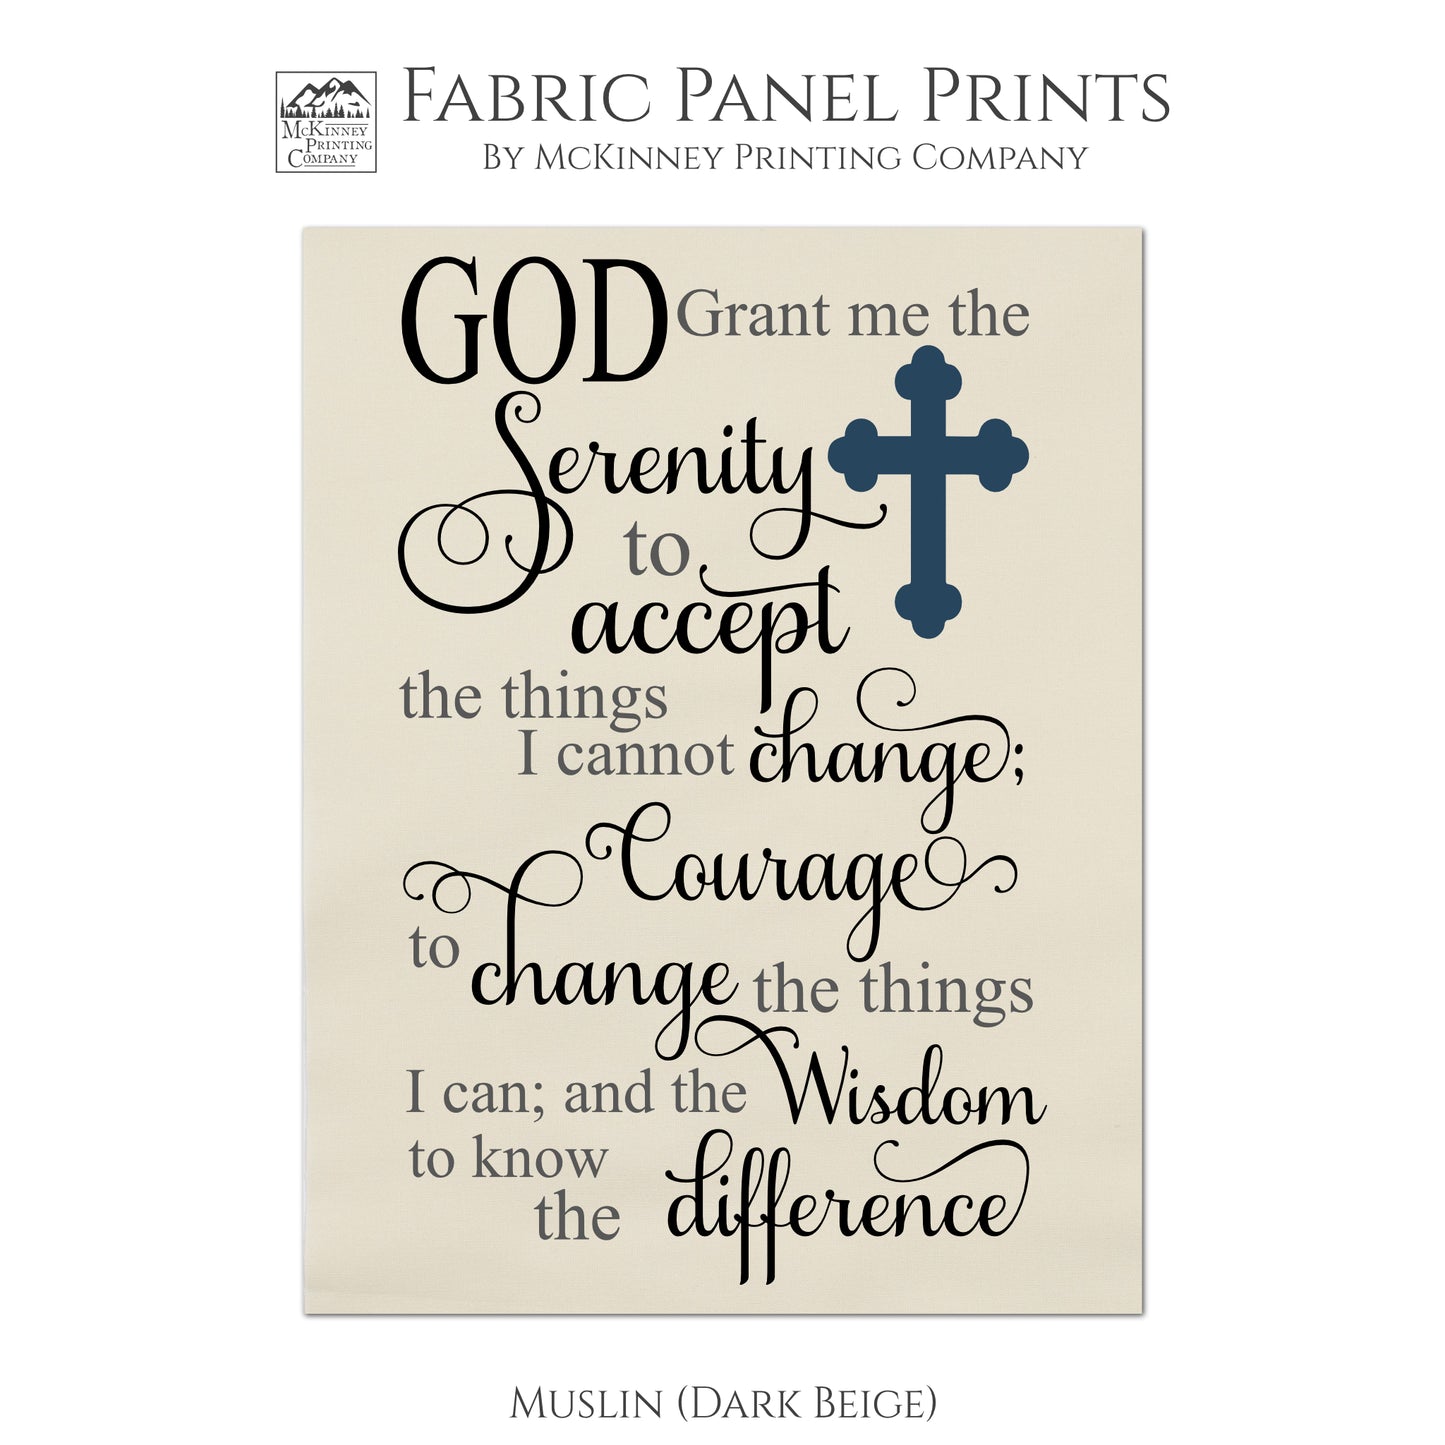 God grant me the serenity to accept the things I cannot change; courage to change the things I can; and the wisdom to know the difference - Serenity Prayer, Fabric Panel Print - Muslin